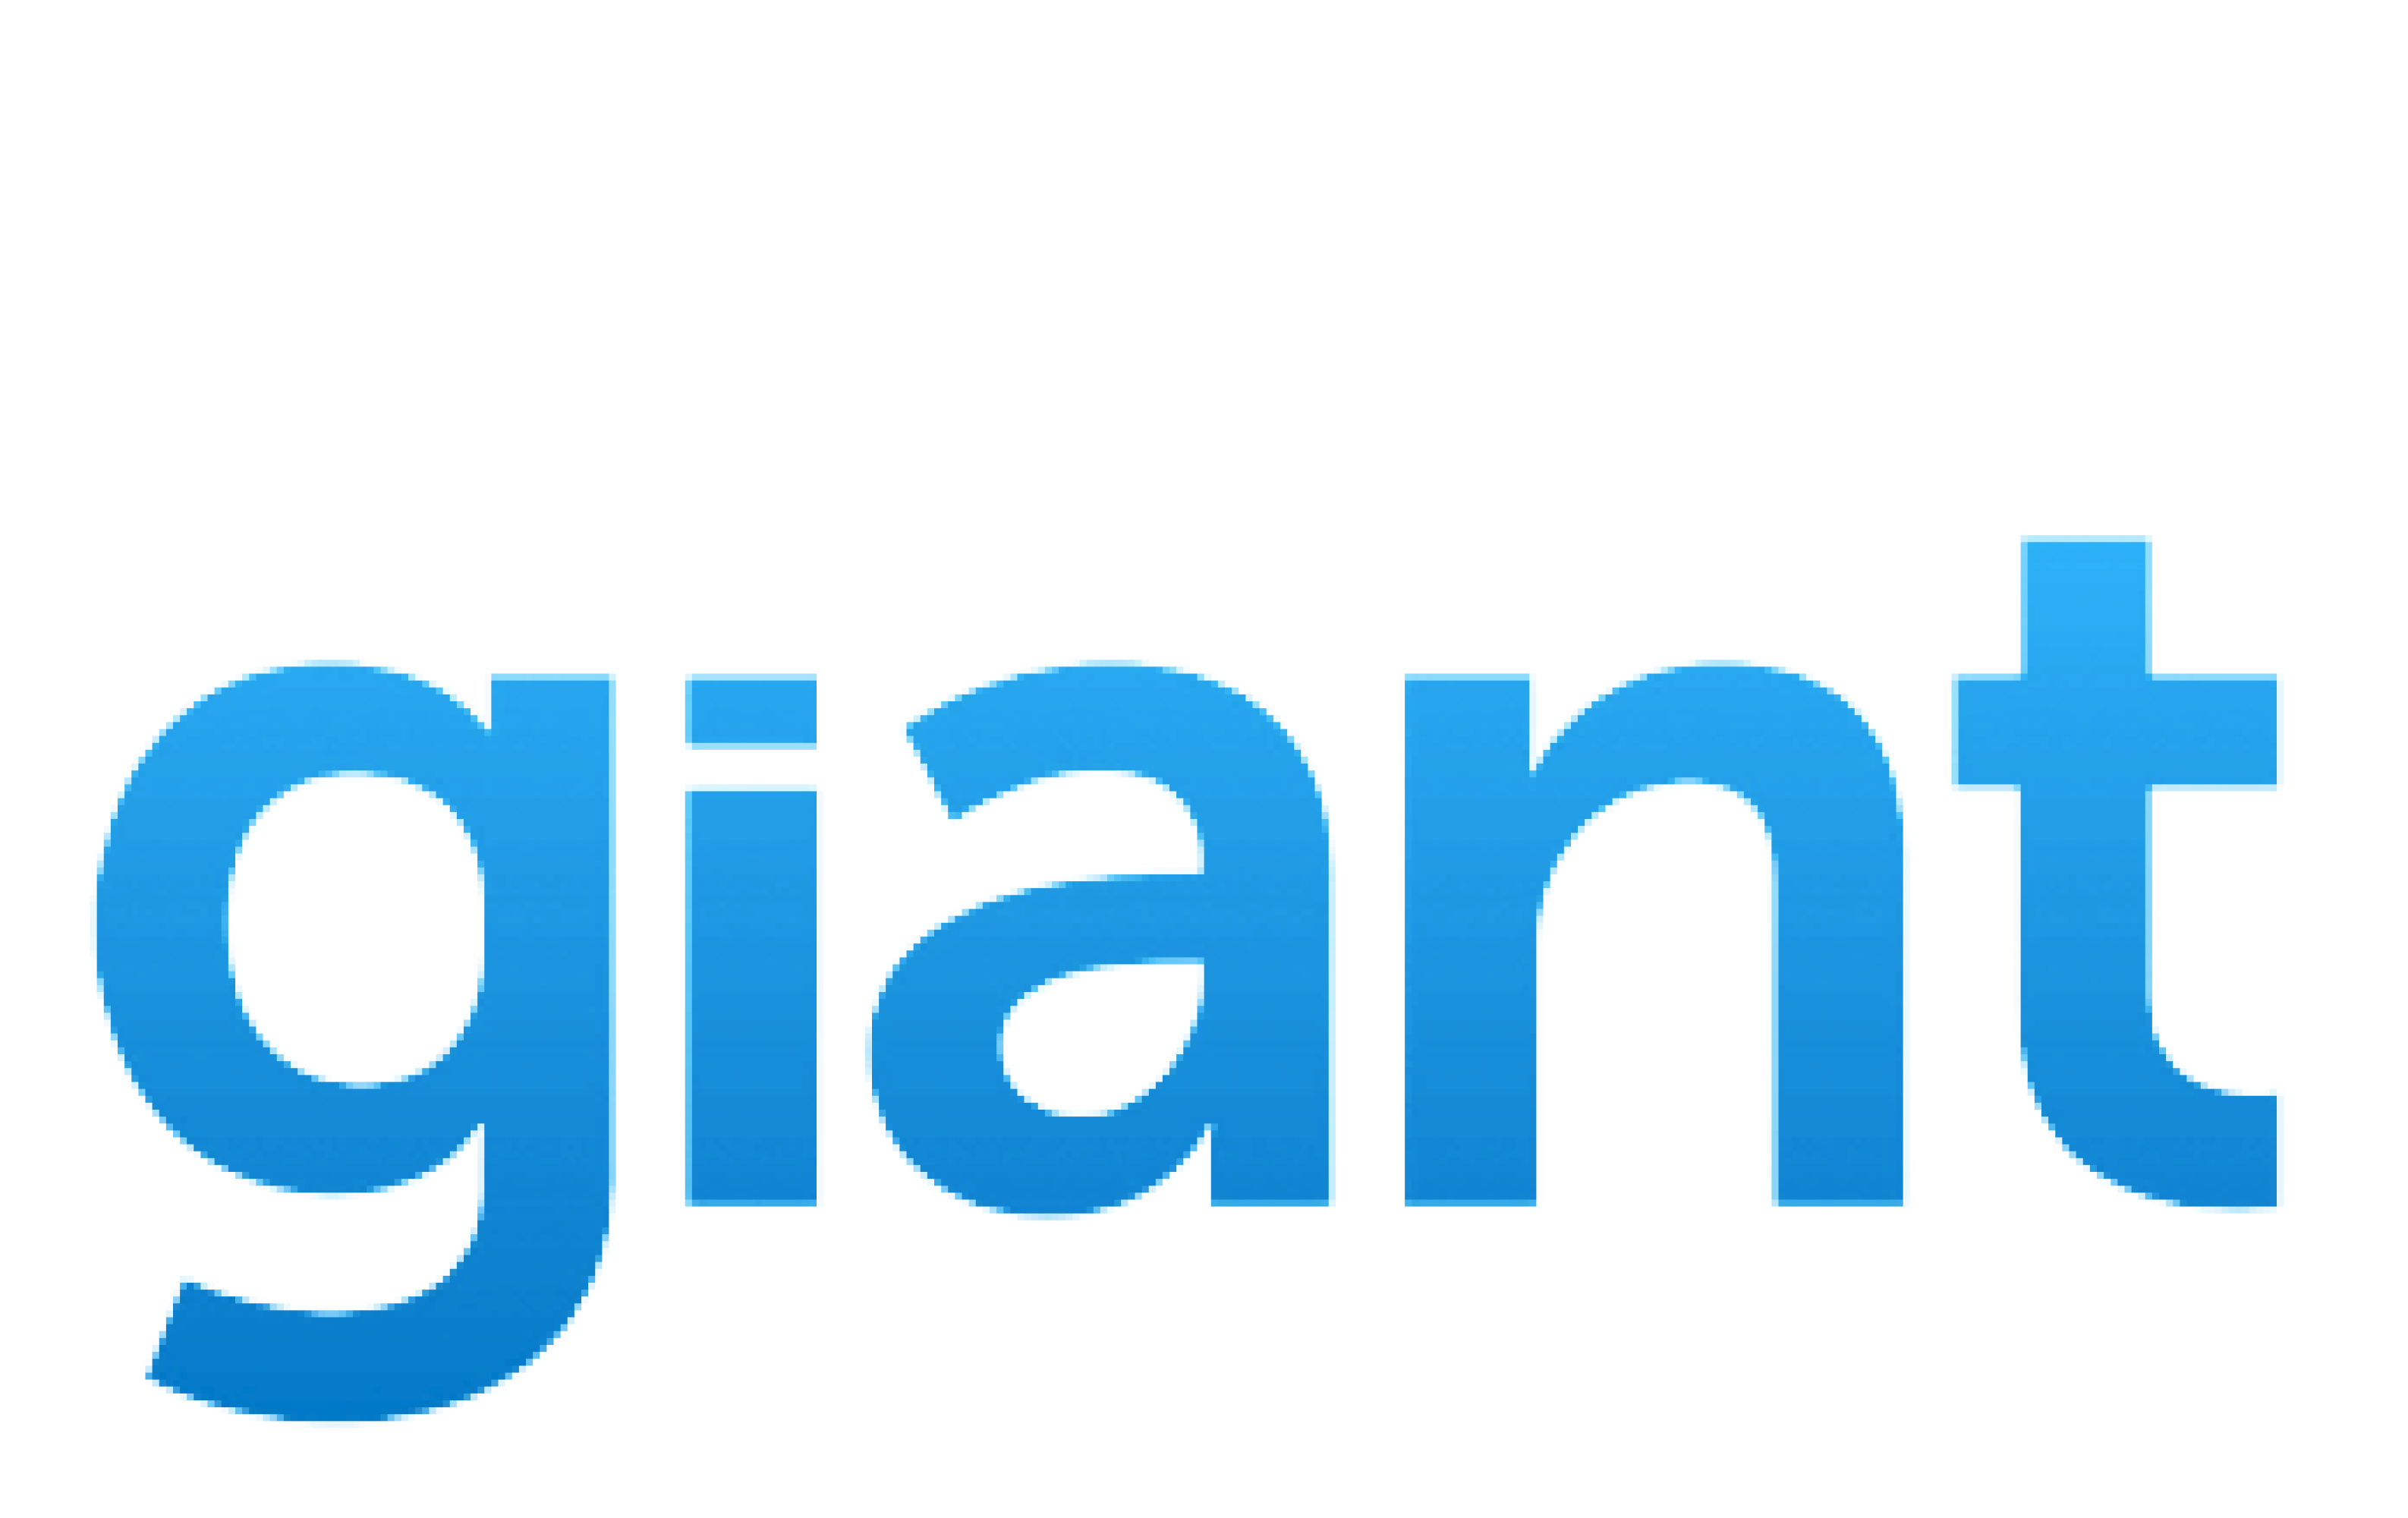 Get the cheapest laser toner and ink cartridges for your printer at TonerGiant